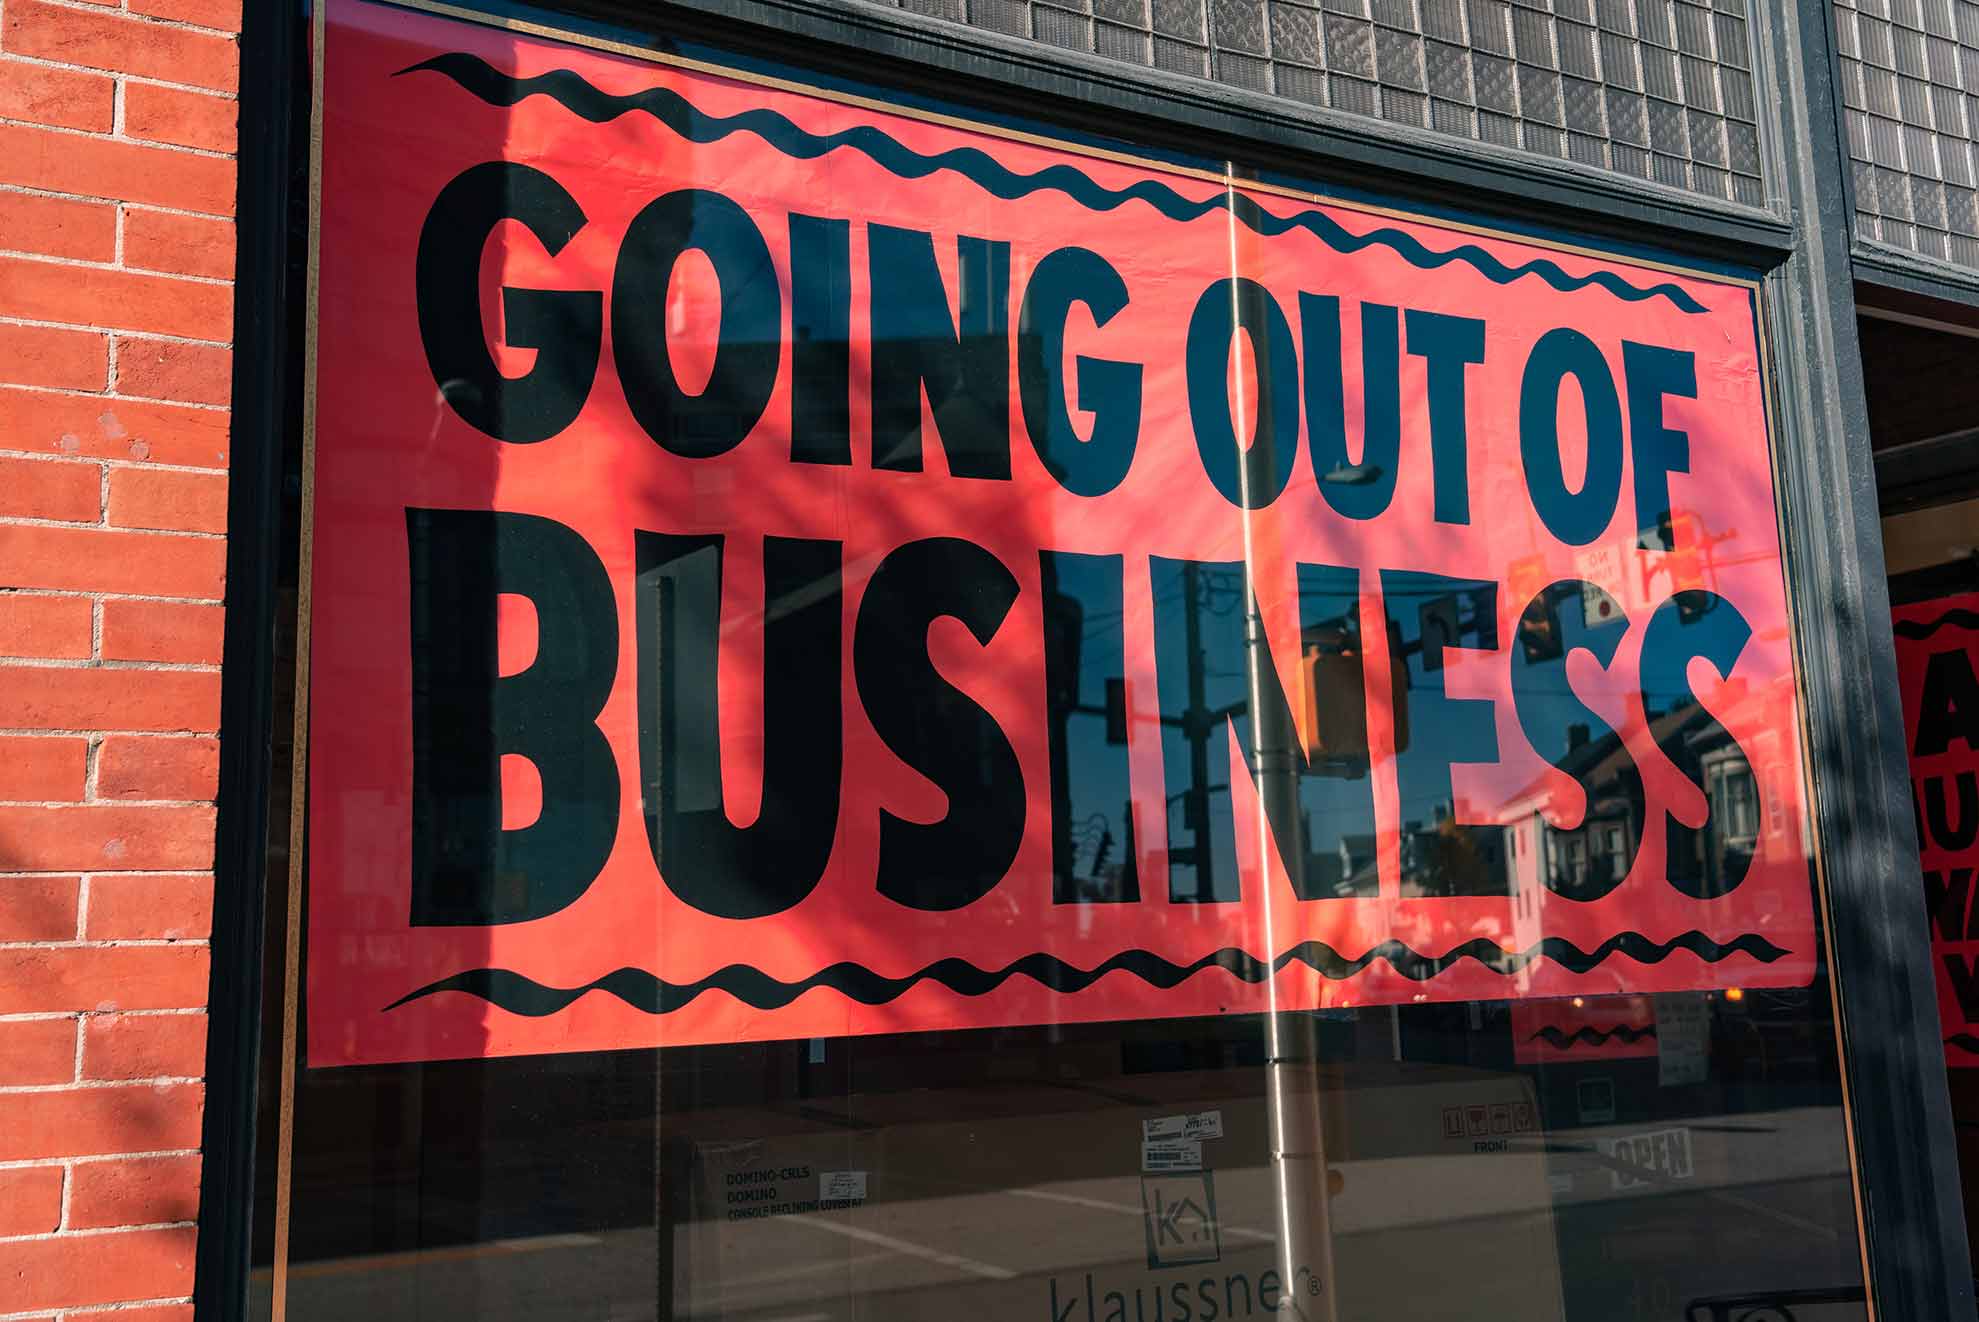 Out Of Business